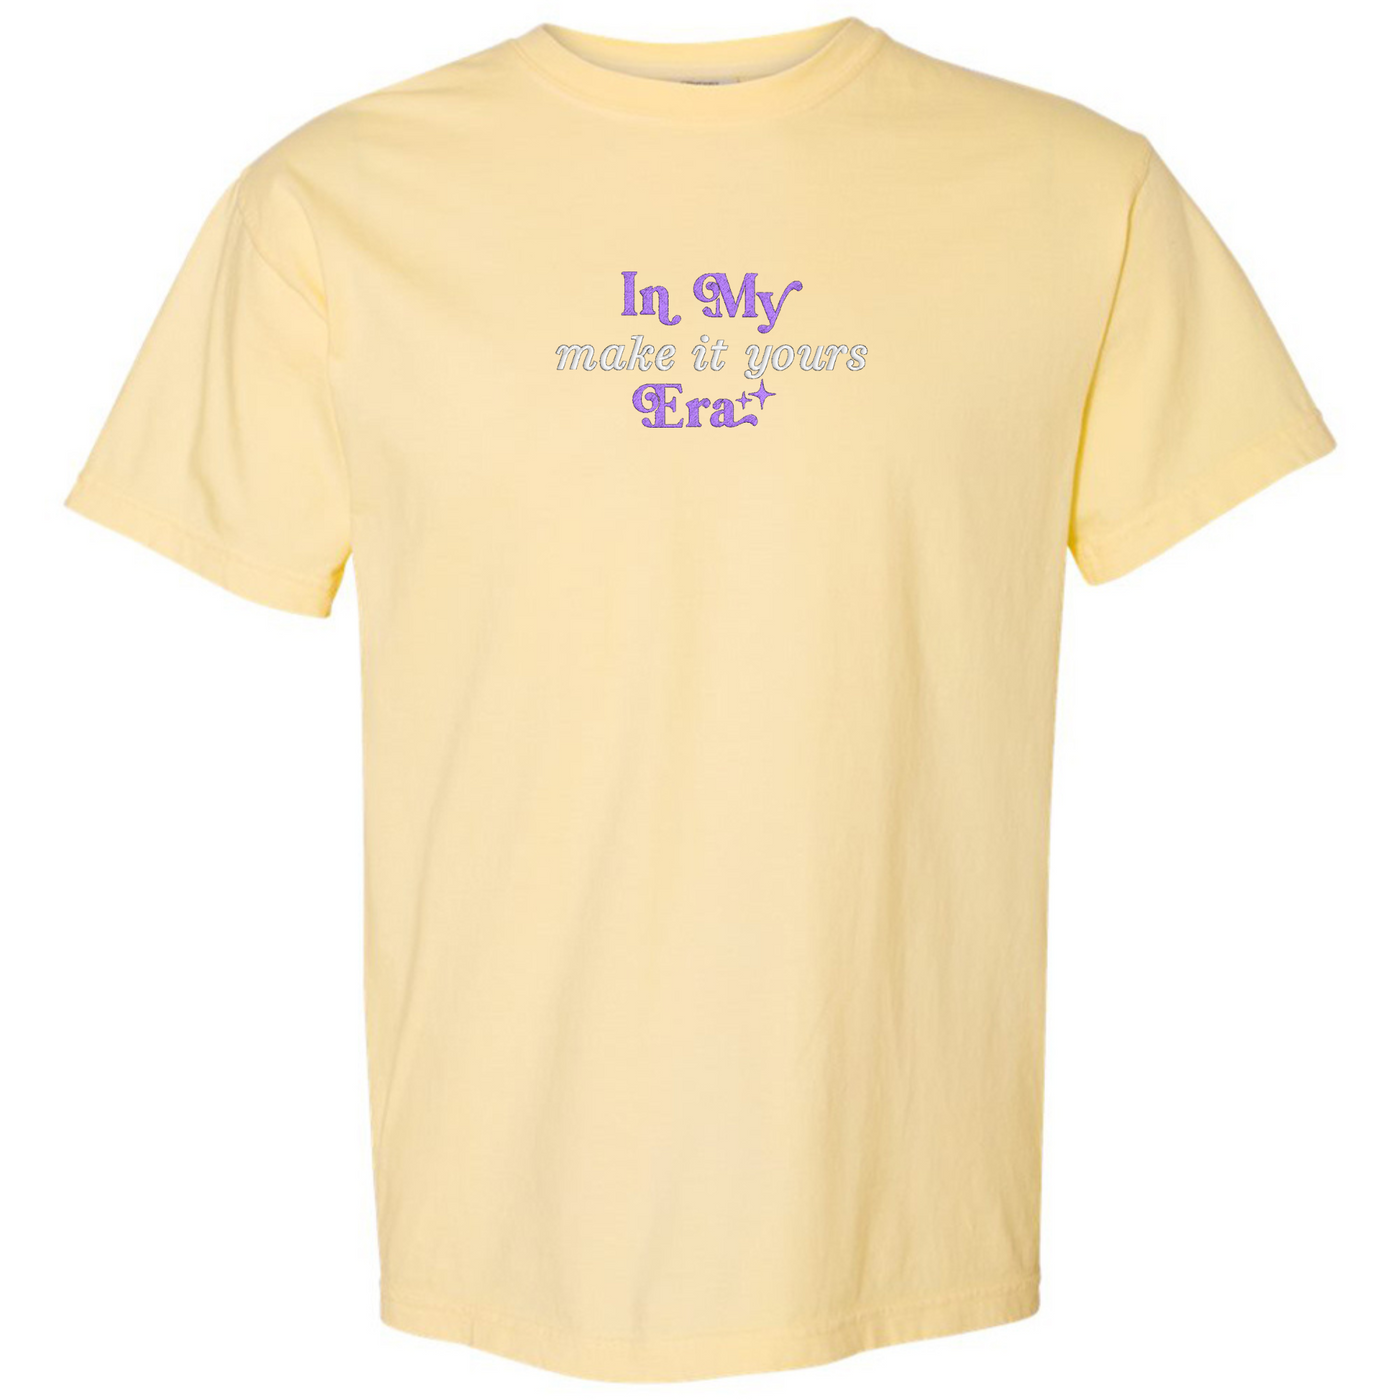 Make It Yours™ 'In My ___ Era' Comfort Colors T-Shirt